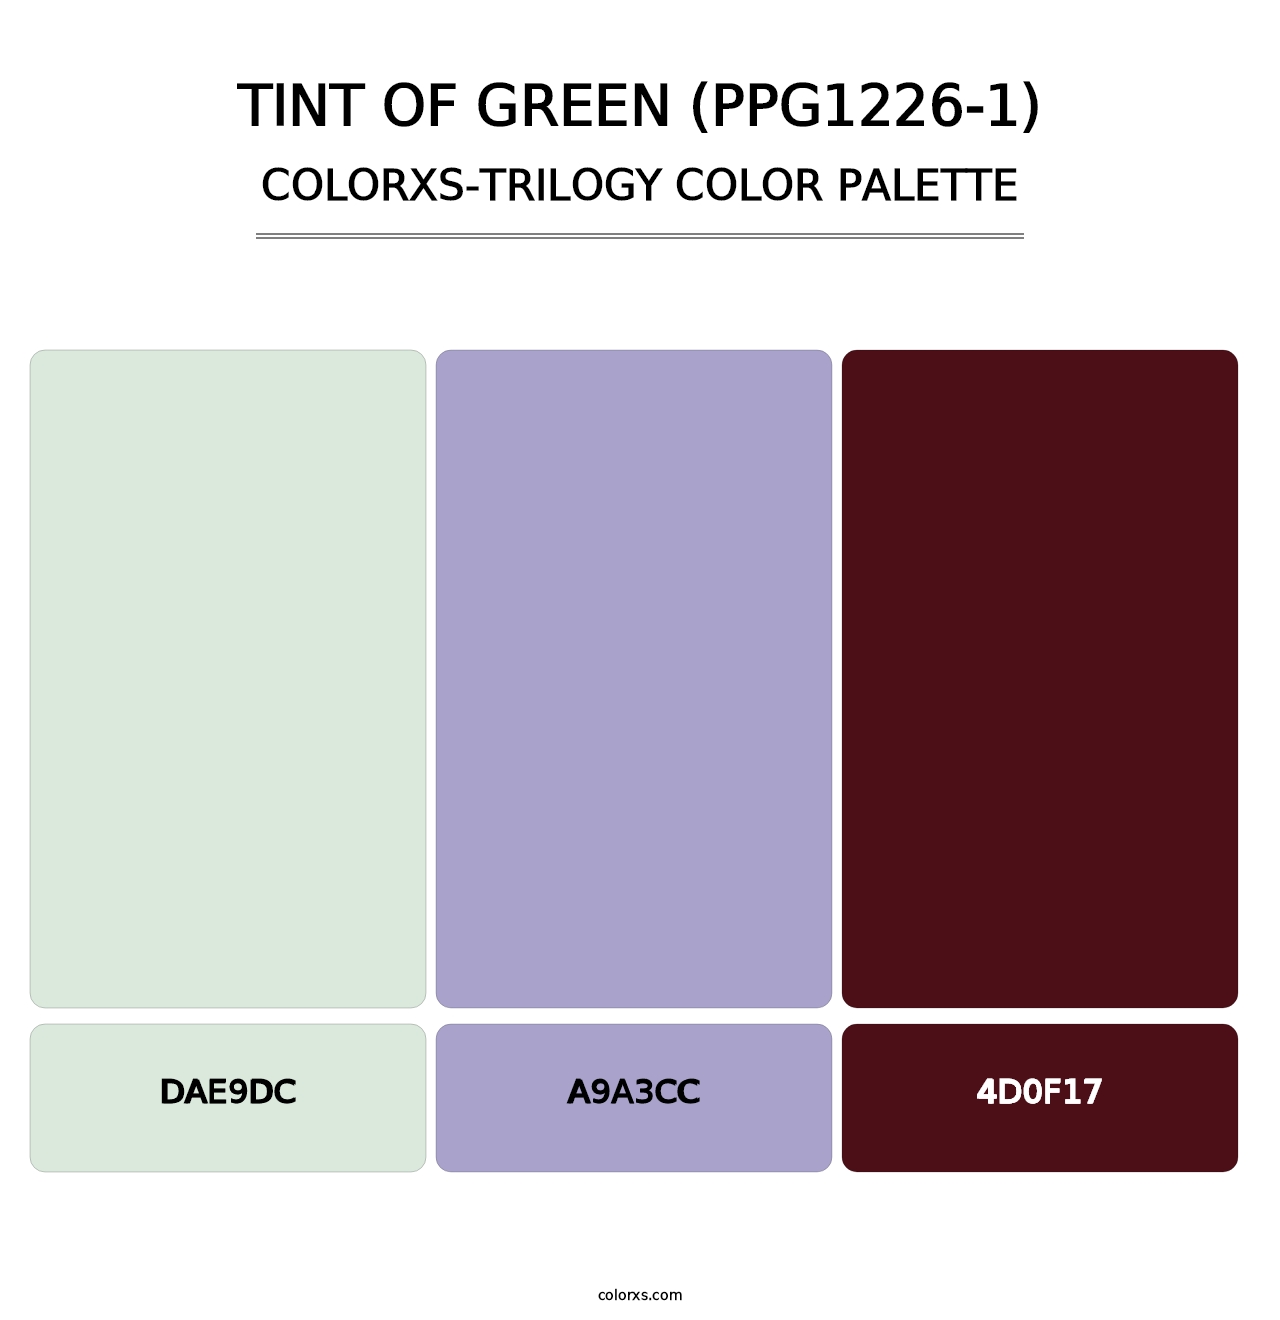 Tint Of Green (PPG1226-1) - Colorxs Trilogy Palette